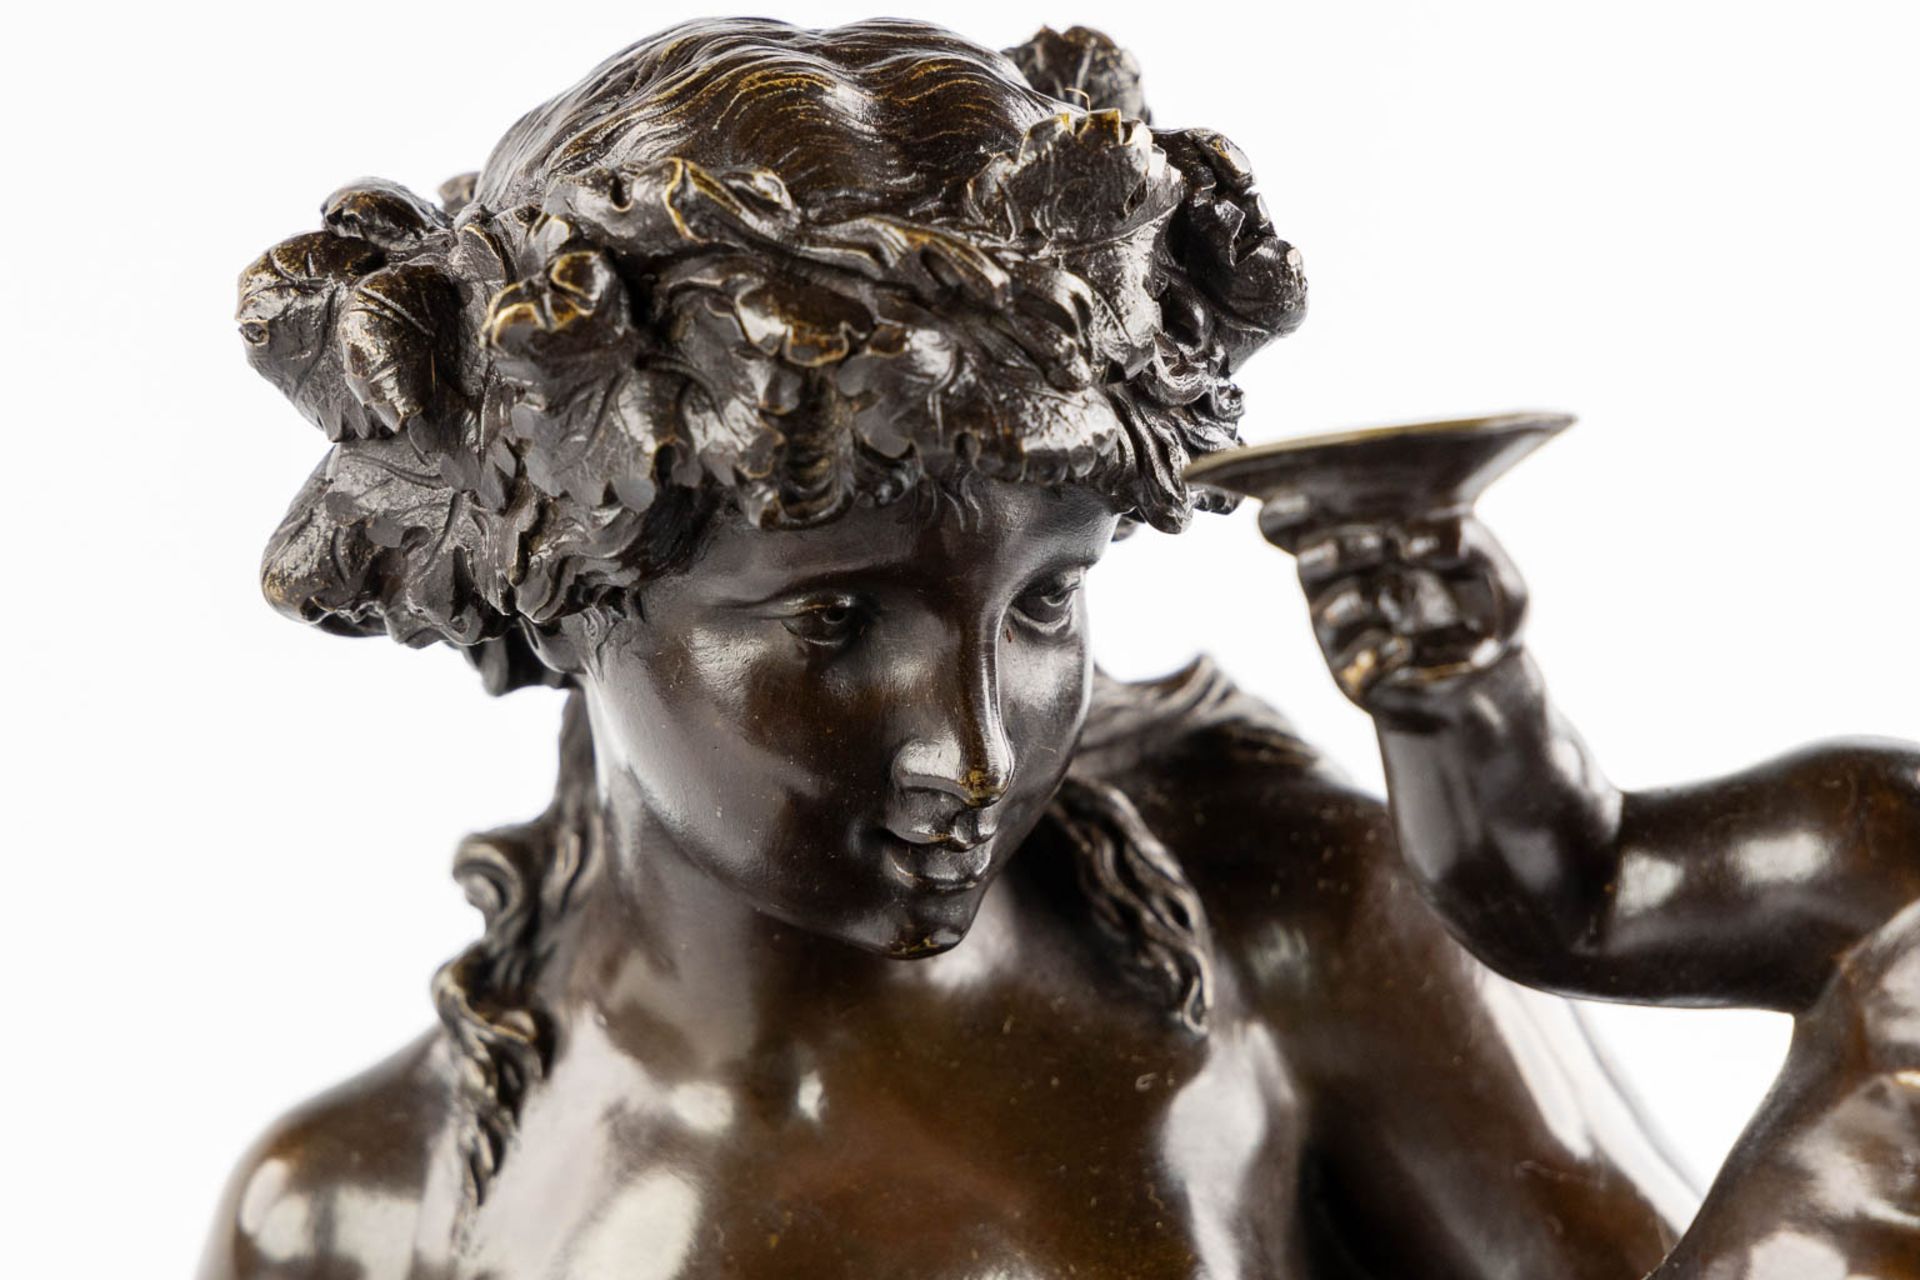 After Claude Michel, CLODION (1738-1814) 'Satyress with putti'. (H:45 x D:26 cm) - Image 7 of 10